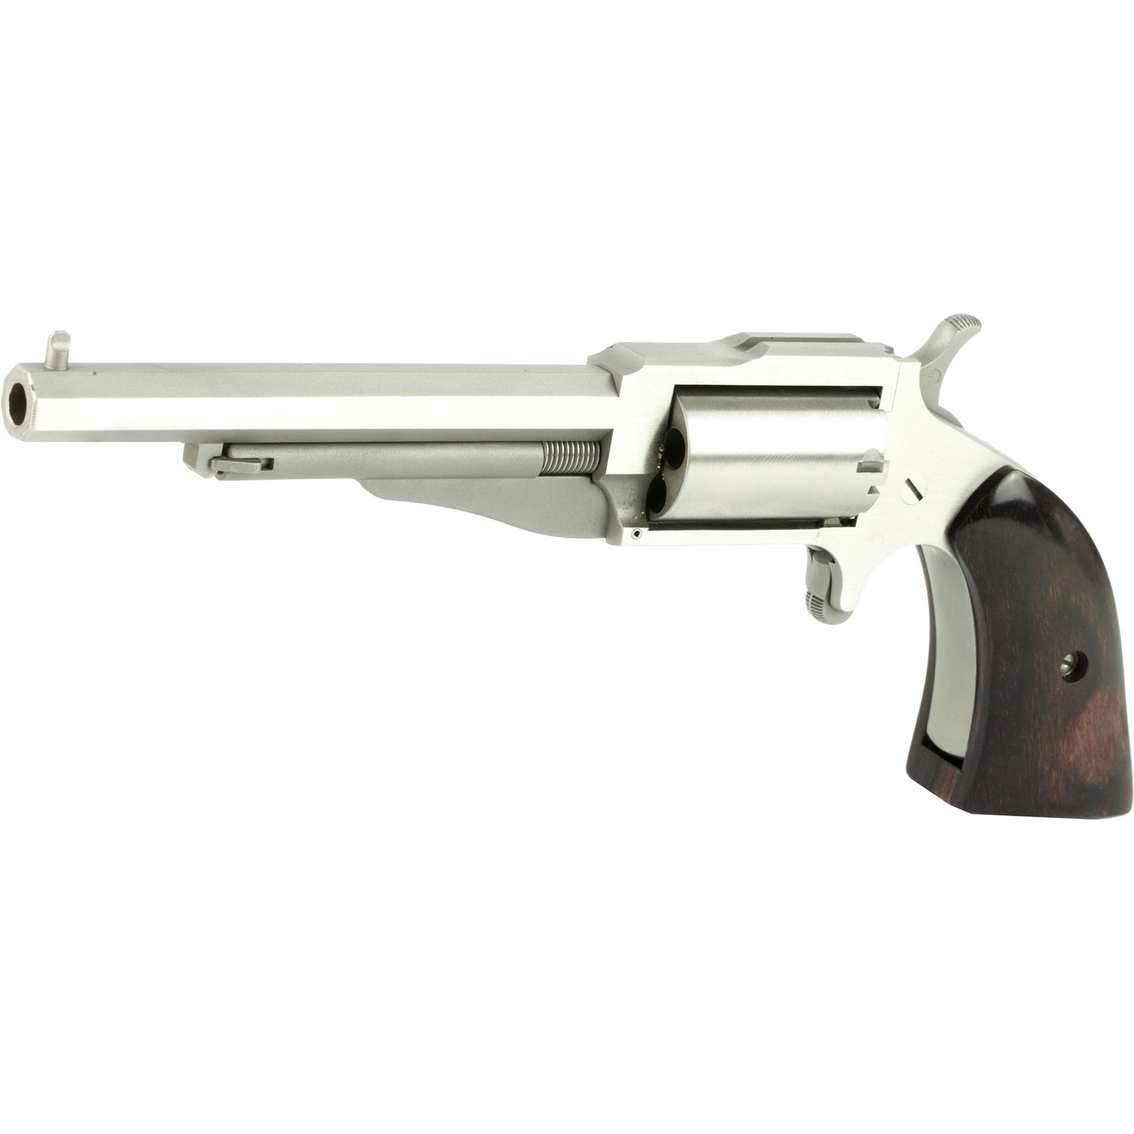 NAA Mini Revolver 22 WMR 4 in. Barrel 5 Rds Revolver Stainless Steel - Image 3 of 3